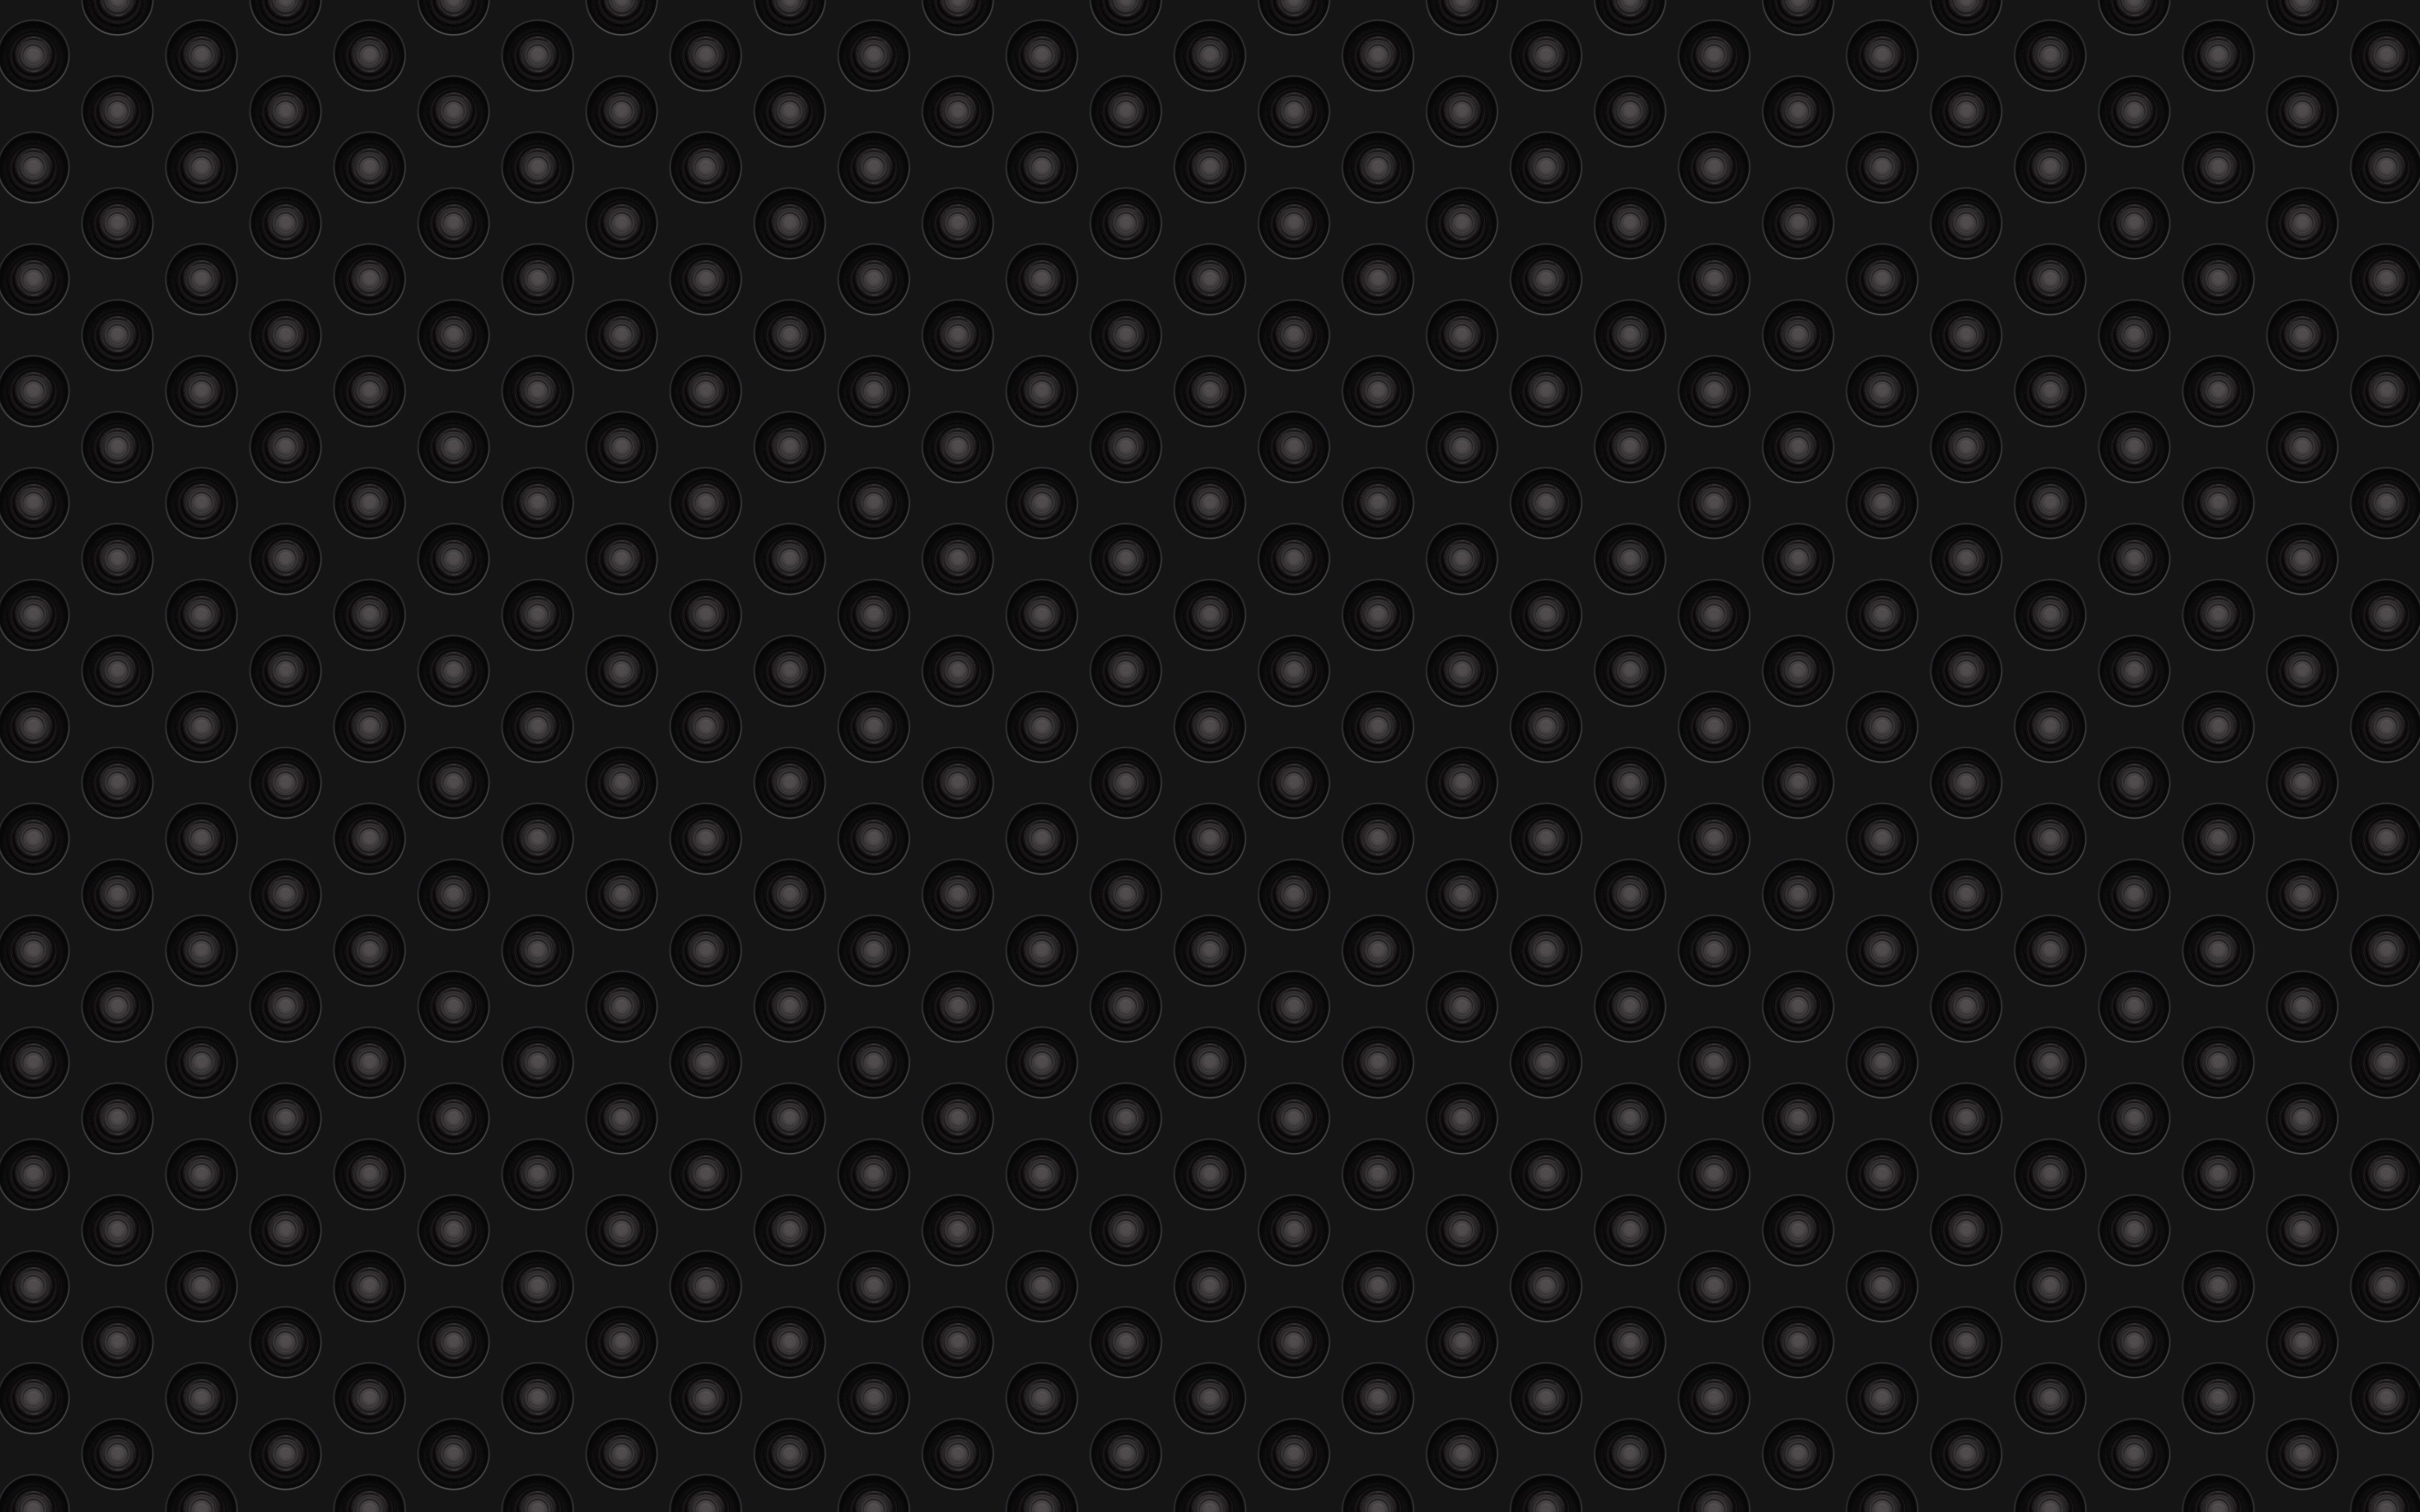 Download wallpaper black dotted background, 4k, macro, metal grid, black metal background, dotted textures, metal textures, black background for desktop with resolution 3840x2400. High Quality HD picture wallpaper